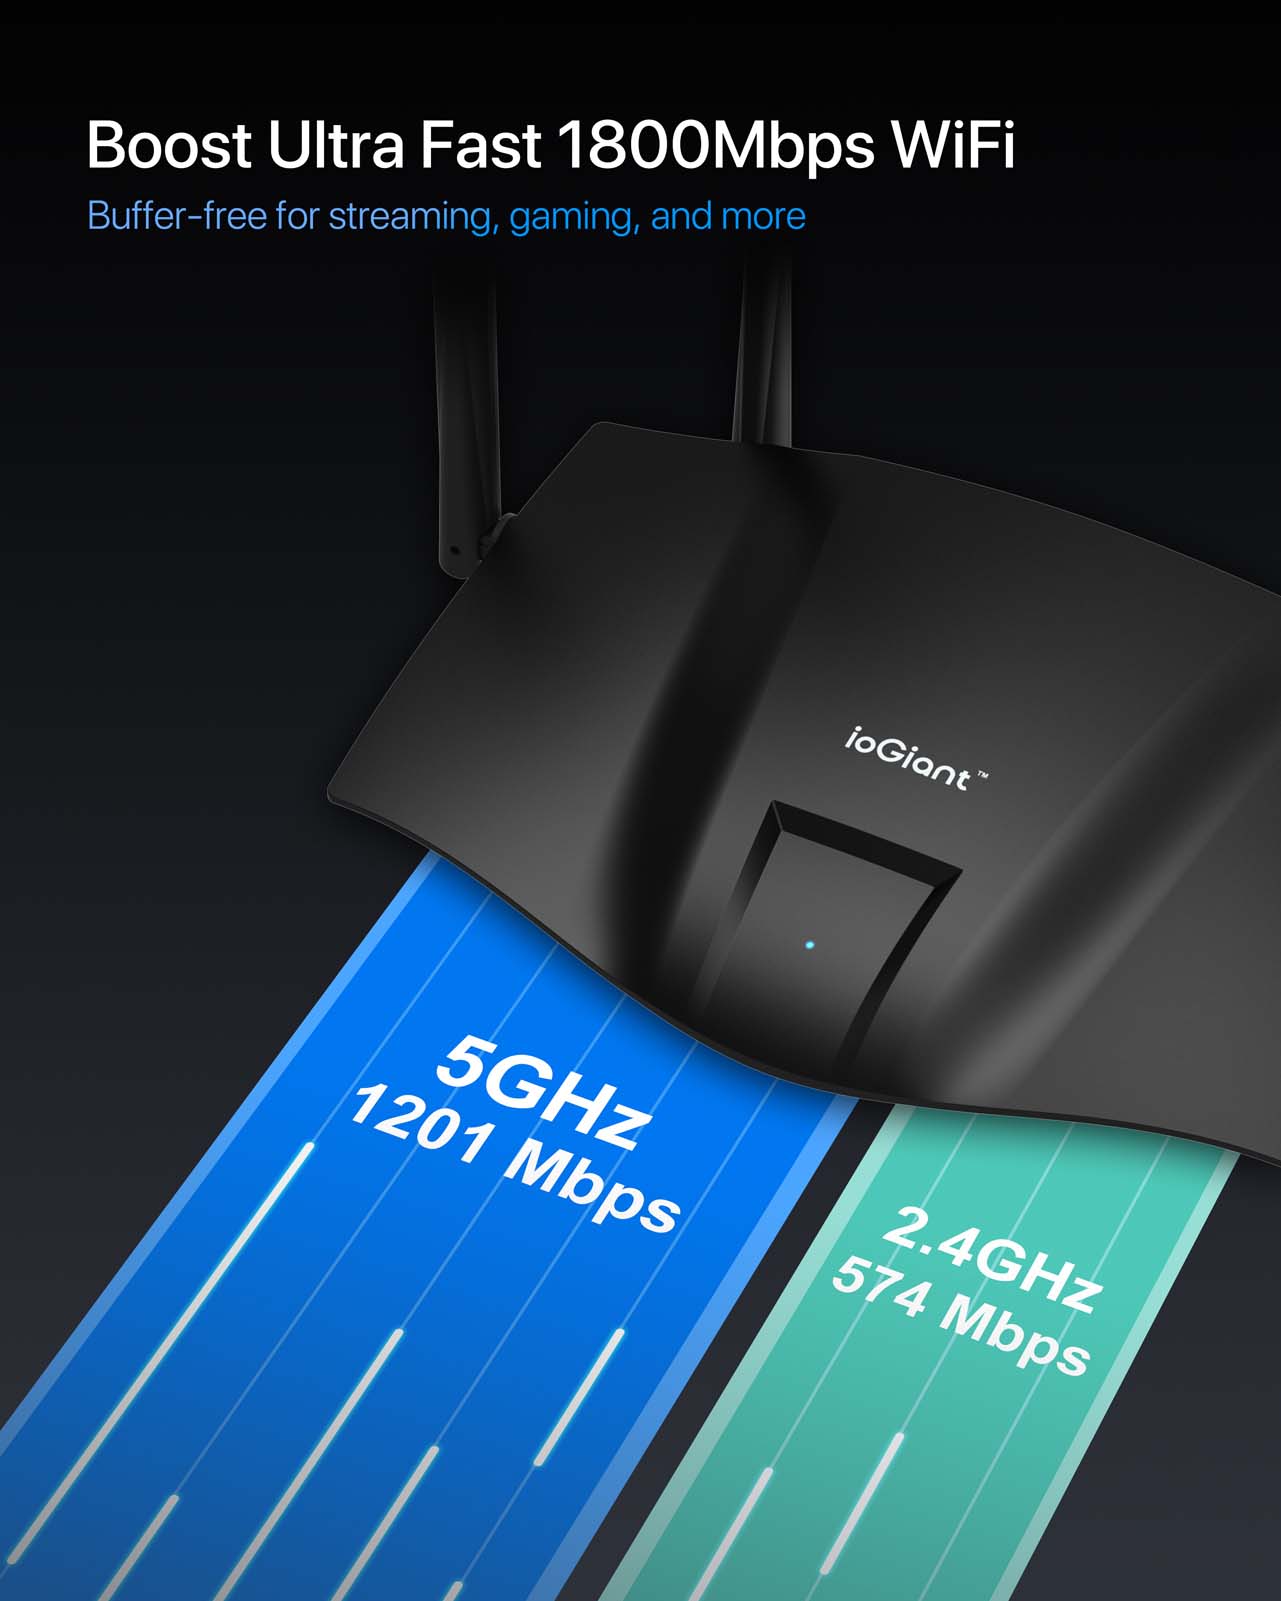 ioGiant AX1800 wireless router boost ultra fast 1800Mbps wifi speed, buffer-free for streaming, gaming and more.